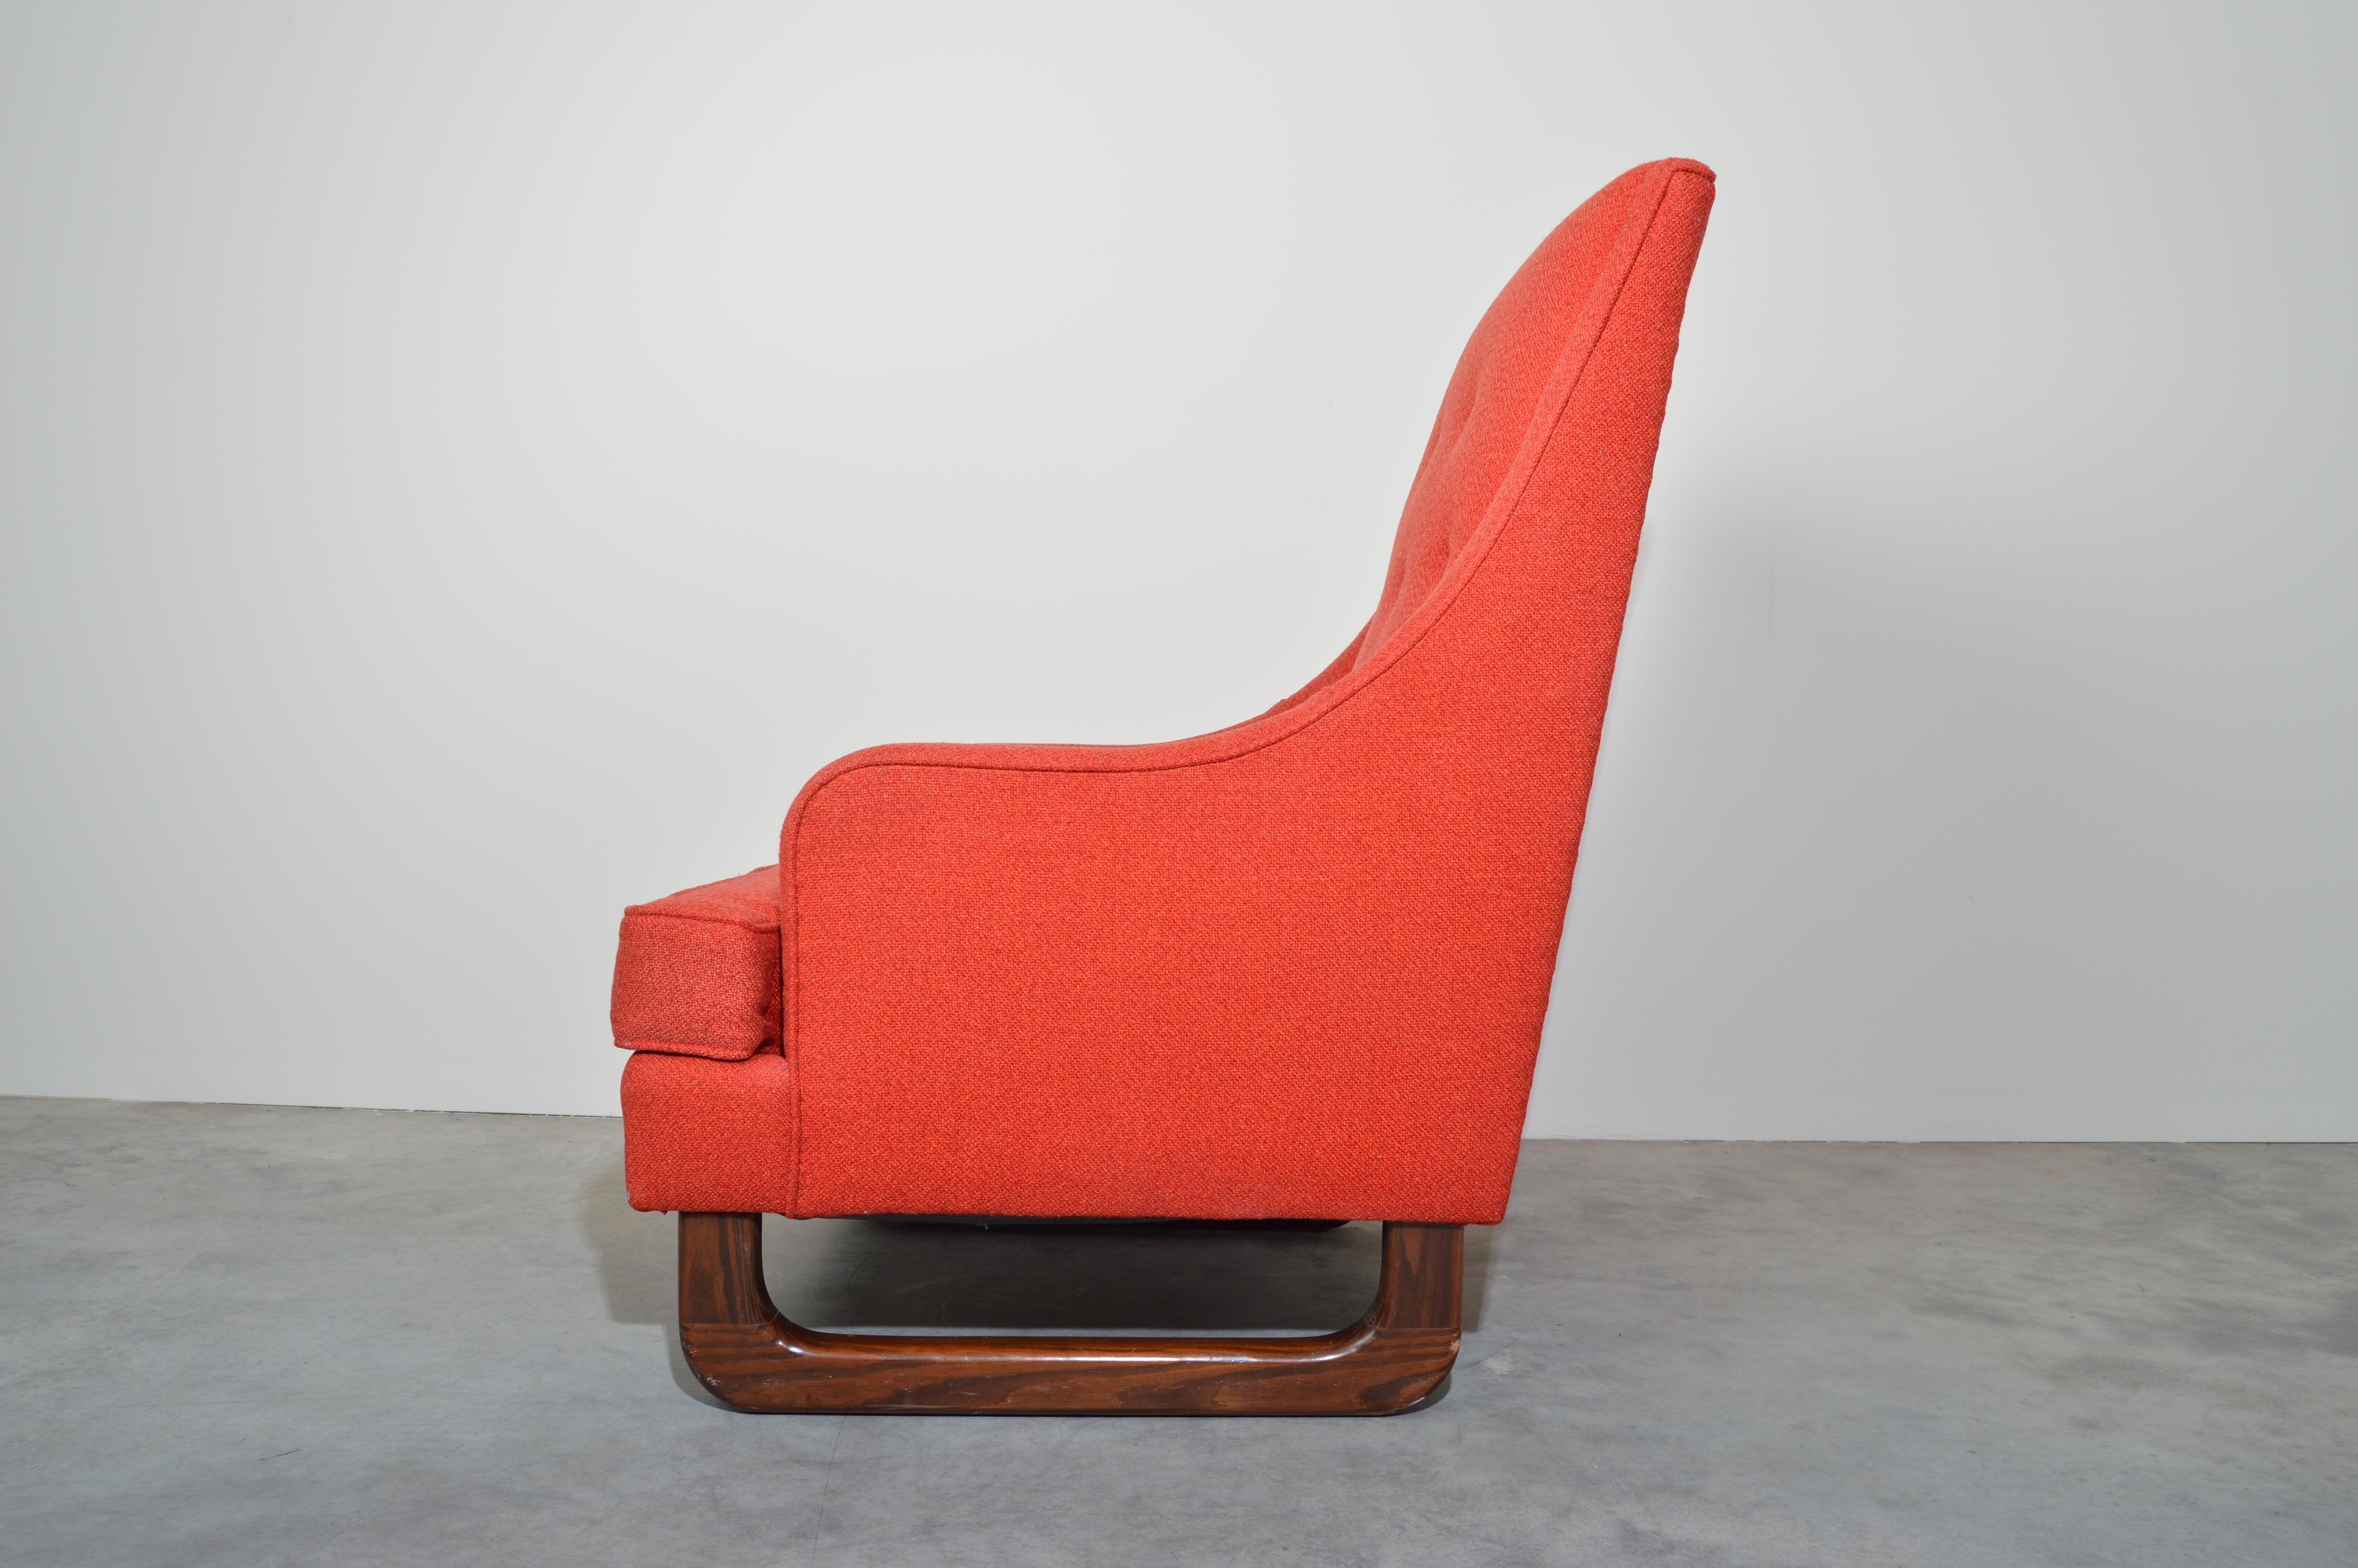 North American Midcentury High Back Lounge Chair Attributed to Adrian Pearsall